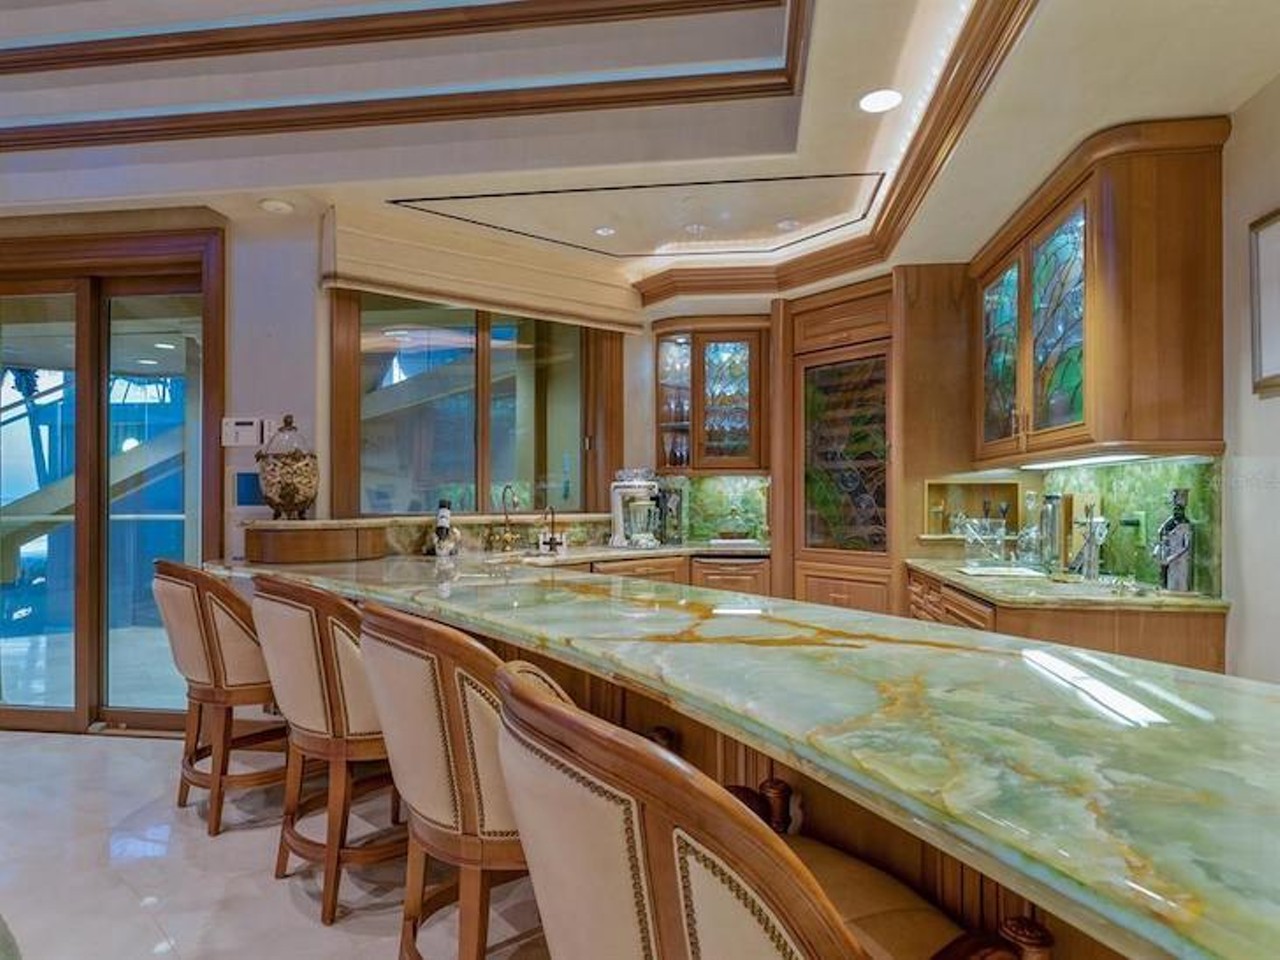 This Tampa Bay mansion looks like a '90s cruise ship, and comes with a waterslide on the roof